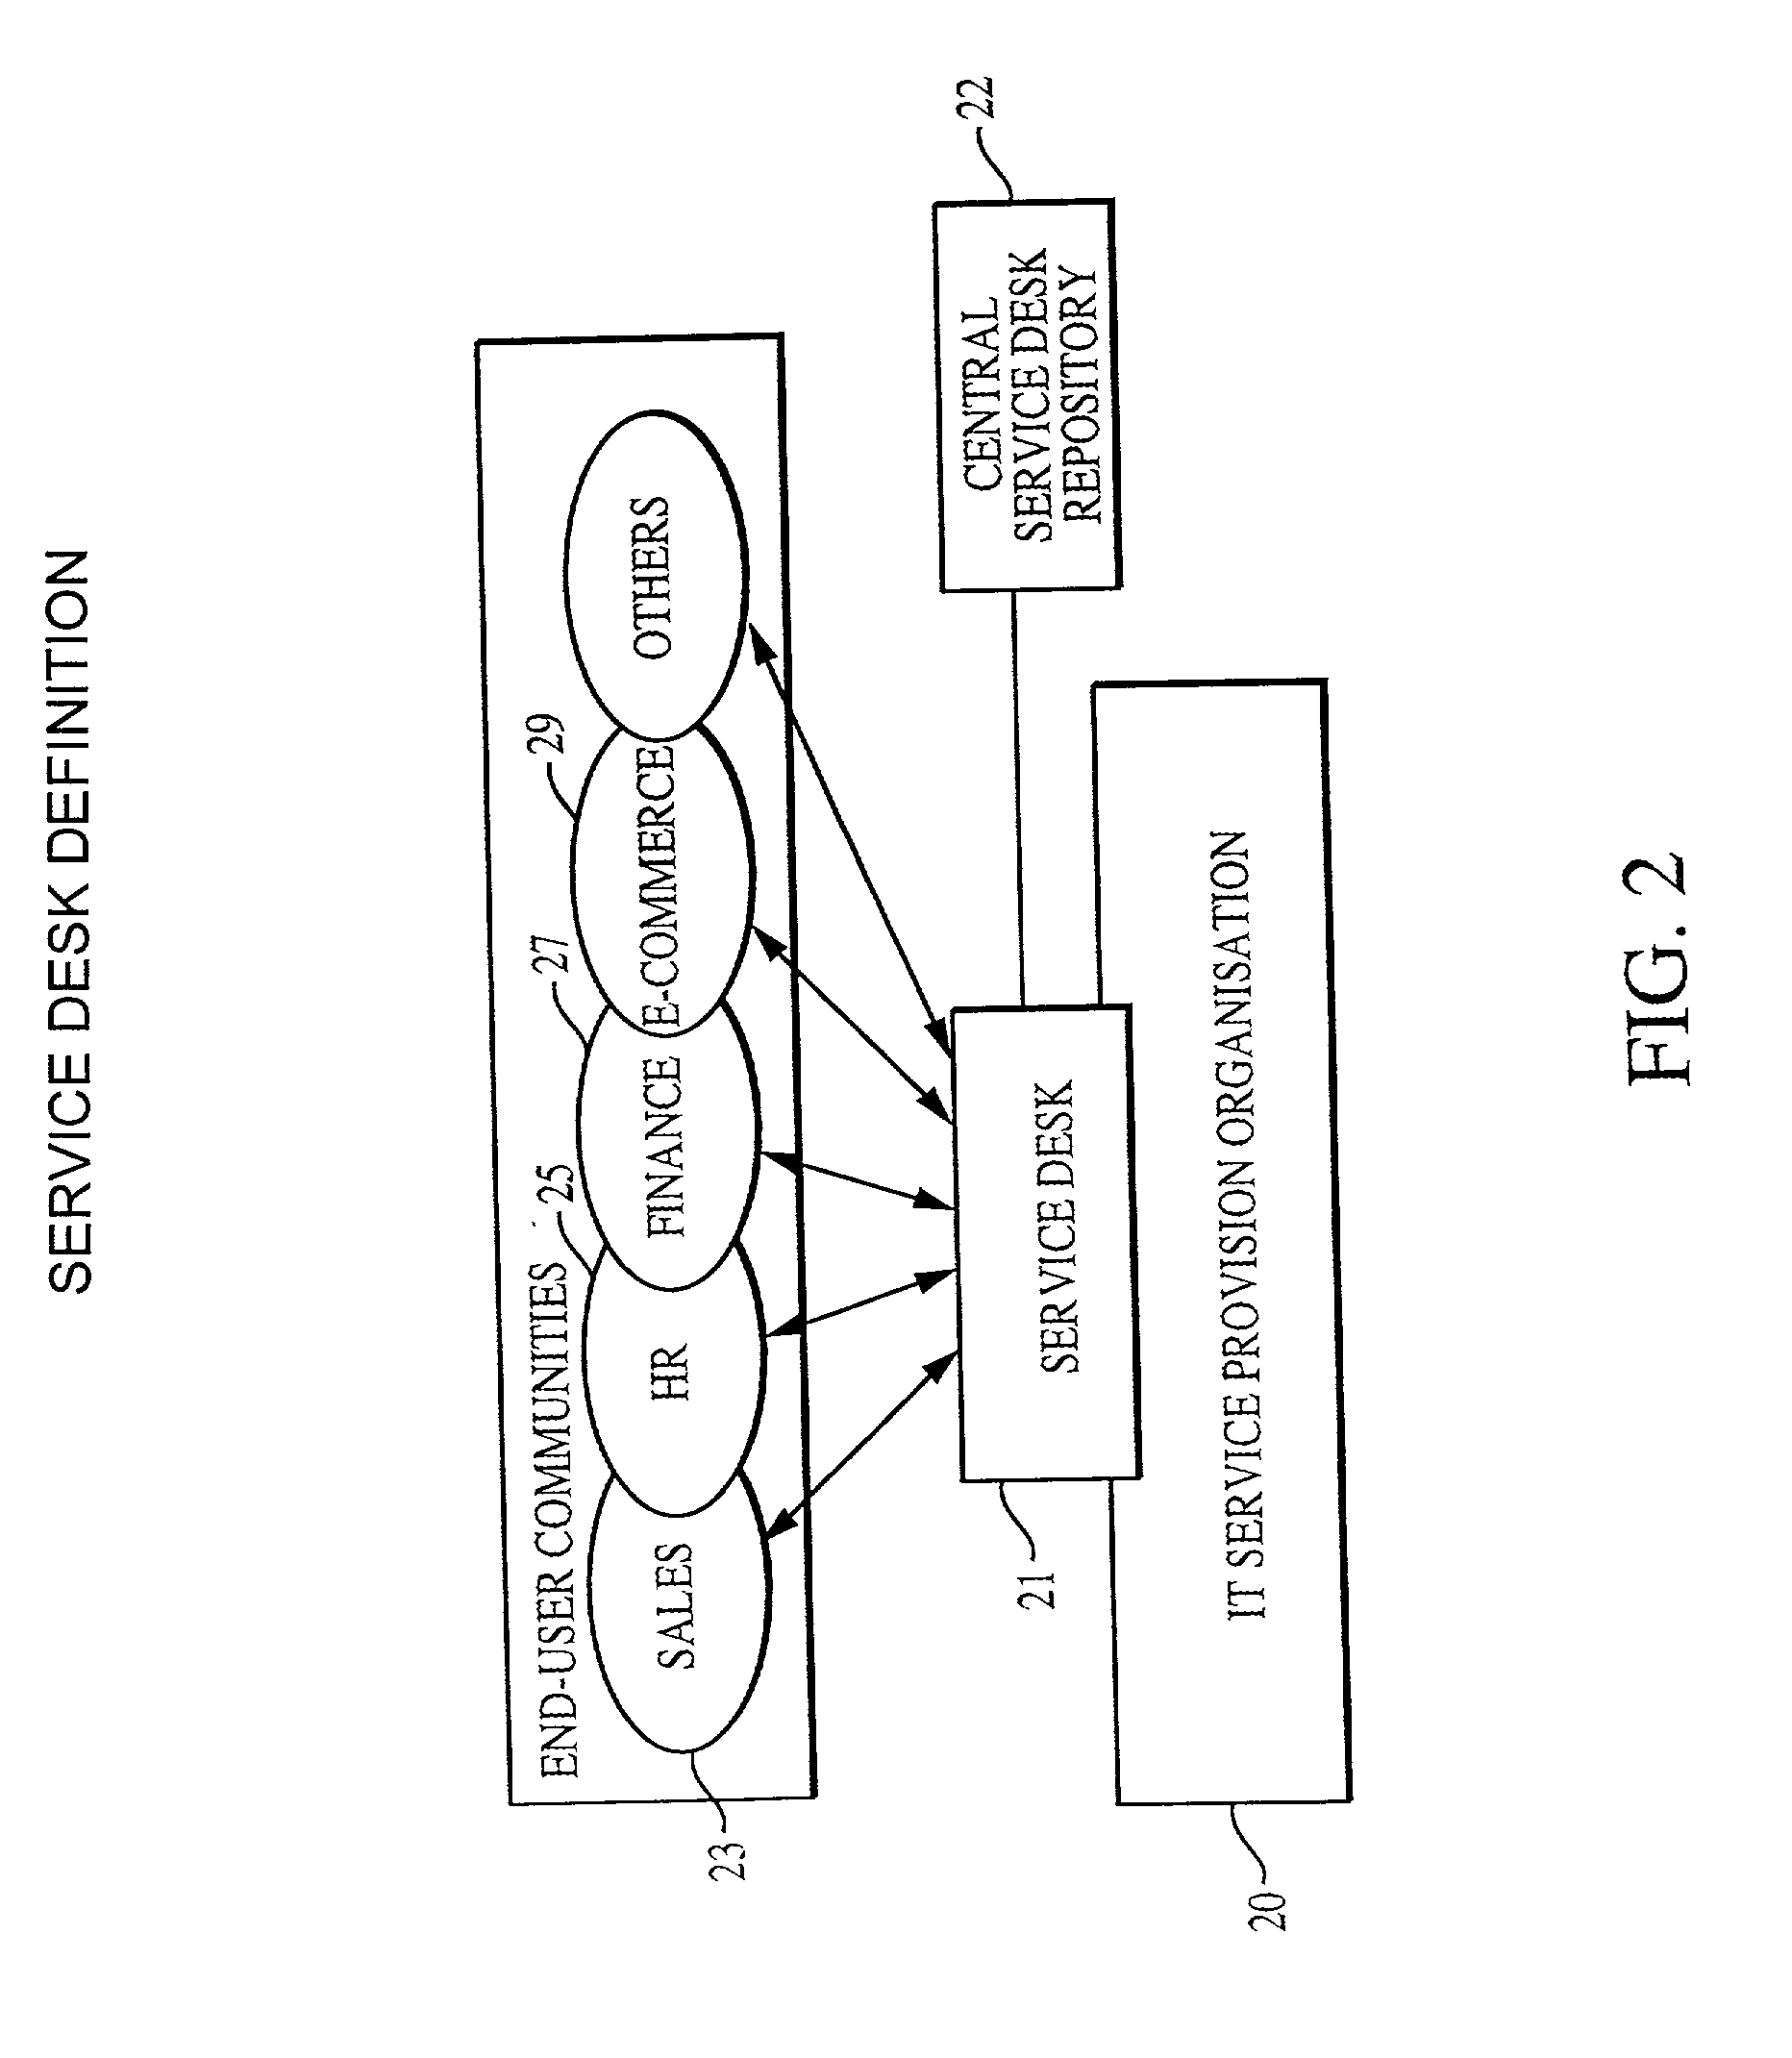 Method for implementing service desk capability